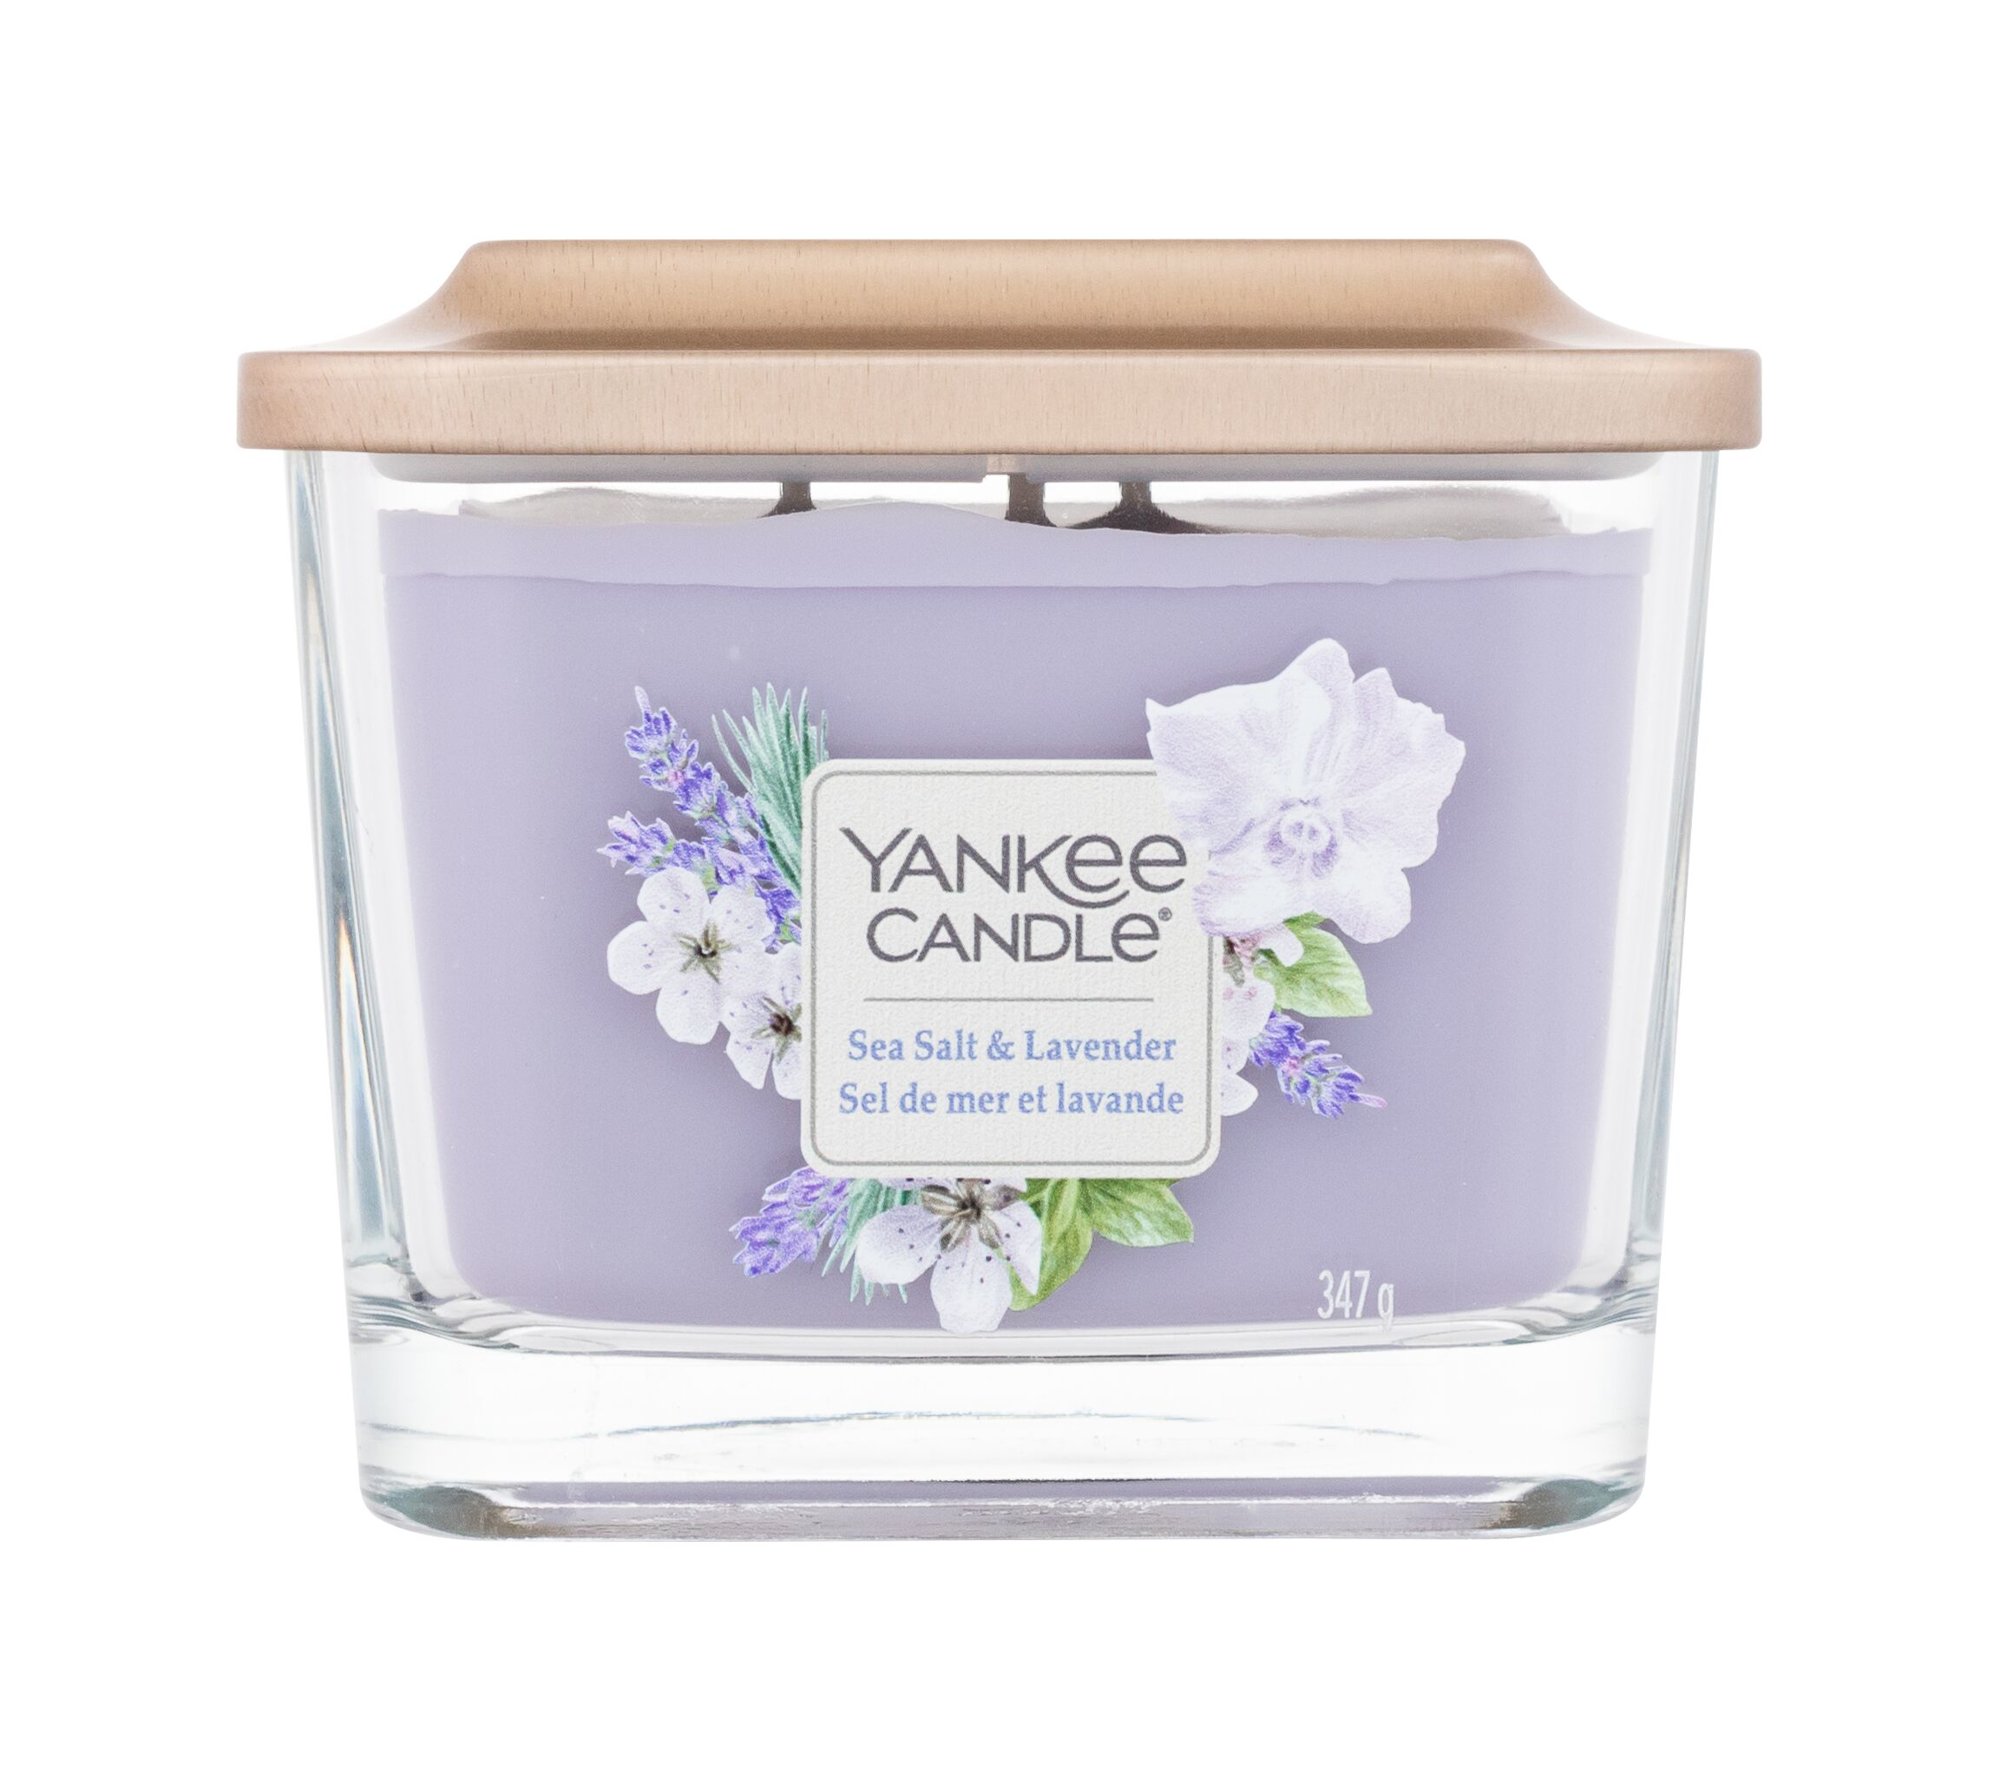 Yankee Candle Elevation Collection Sea Salt & Lavender 347g Kvepalai Unisex Scented Candle